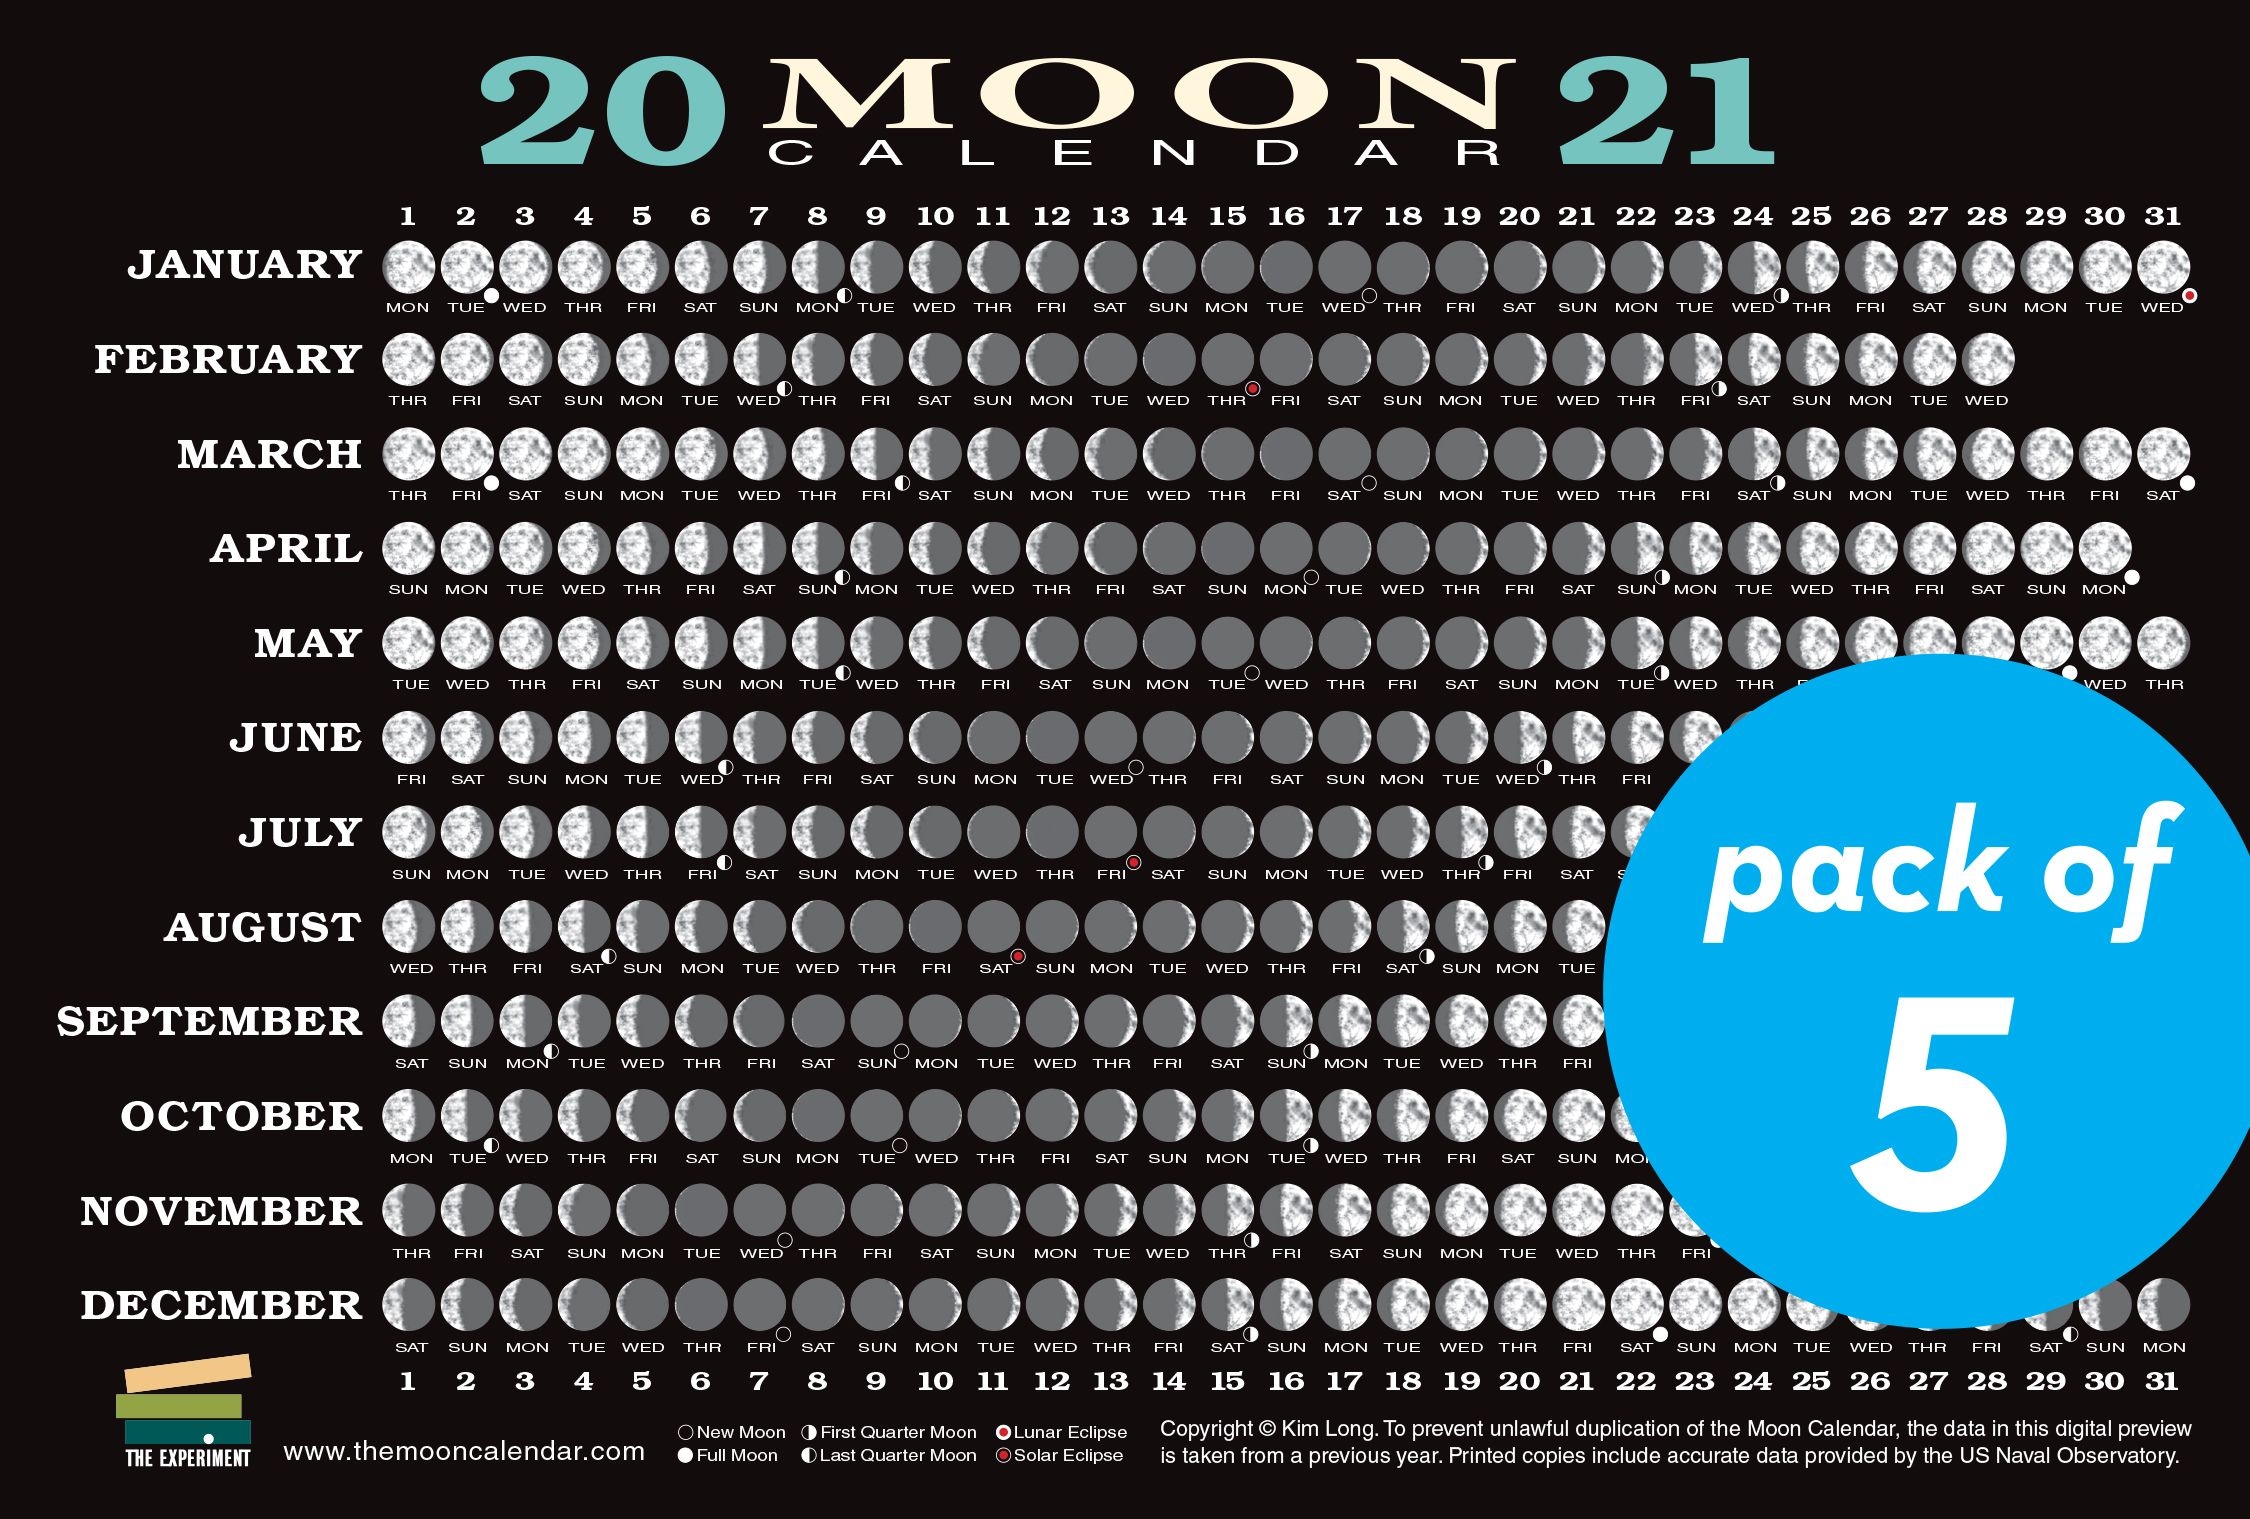 2021 moon calendar card (5 pack) : lunar phases, eclipses